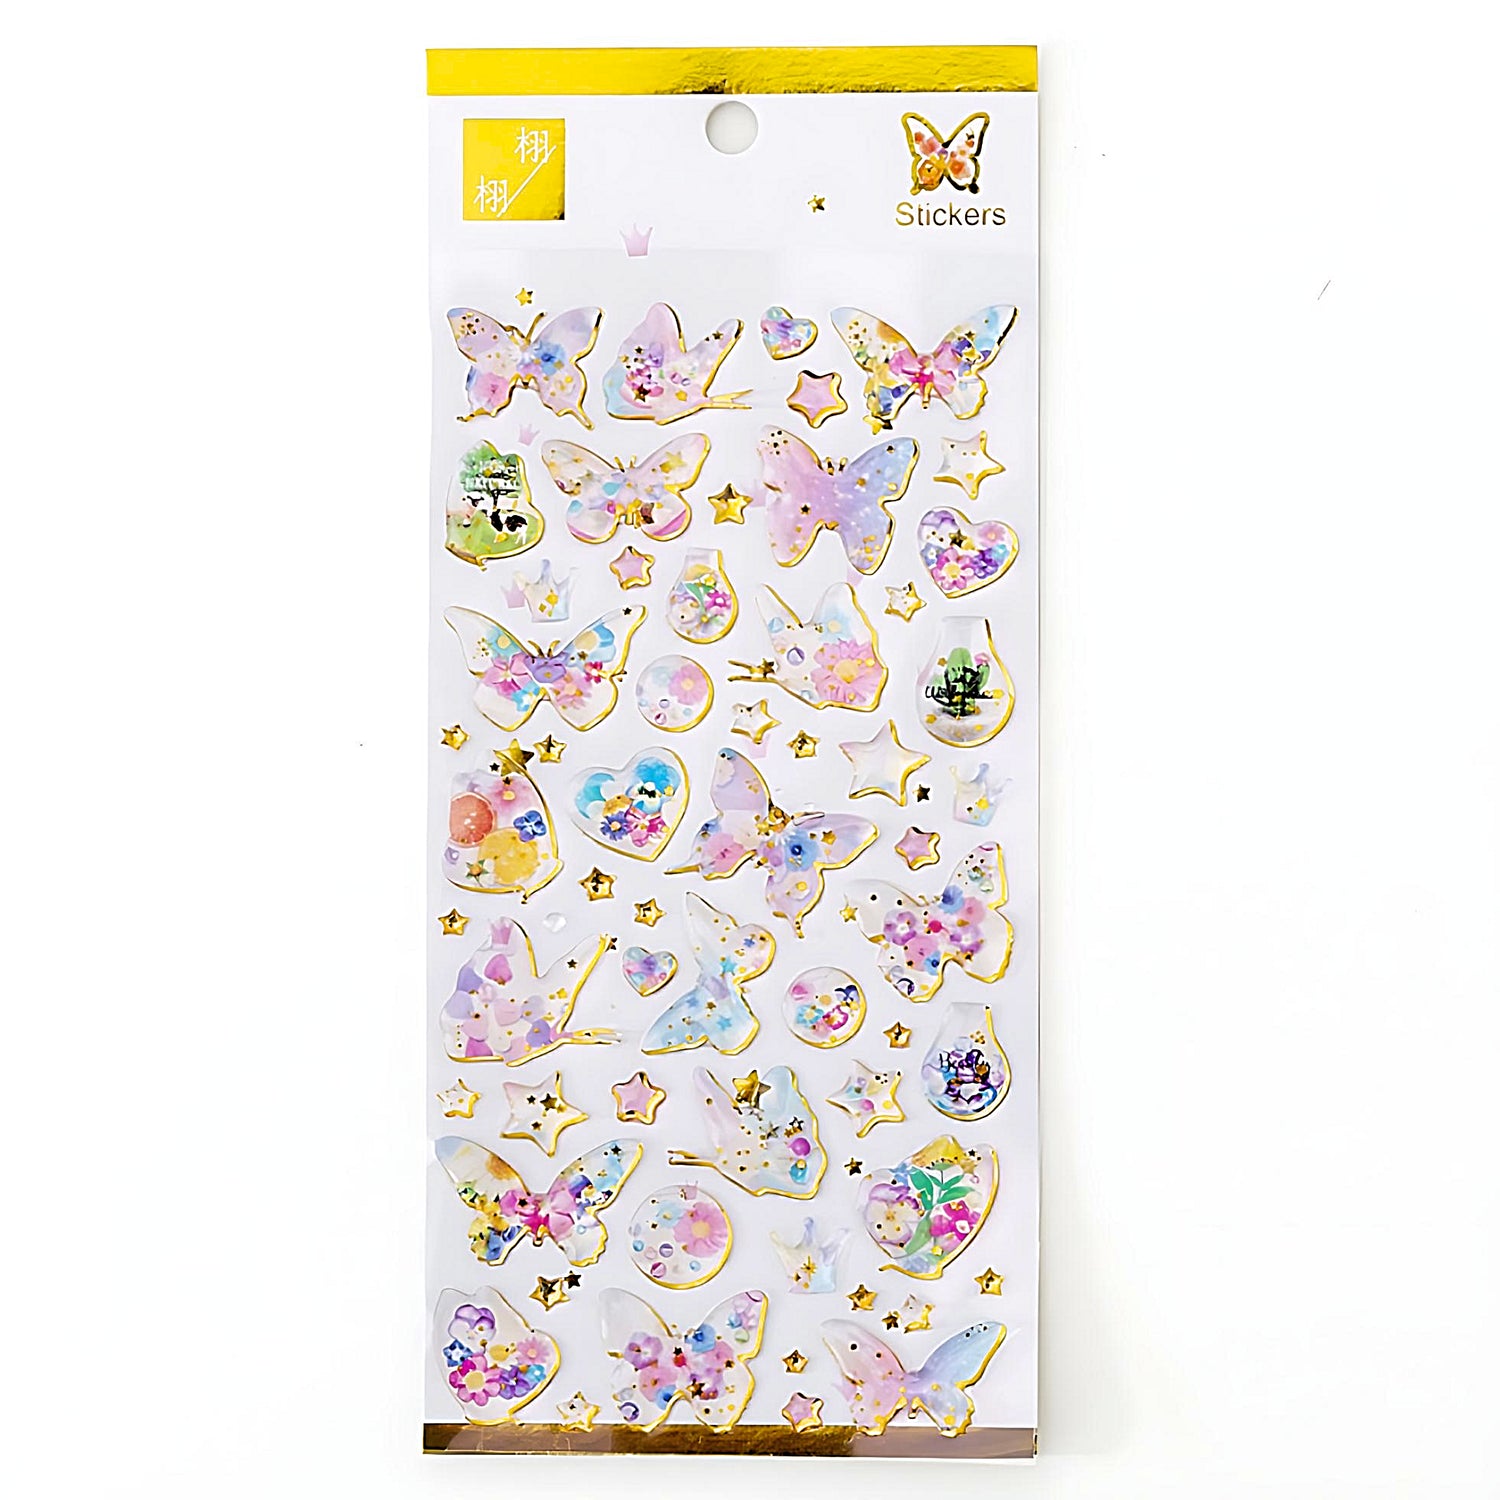 Stickers, Stationery Accessories